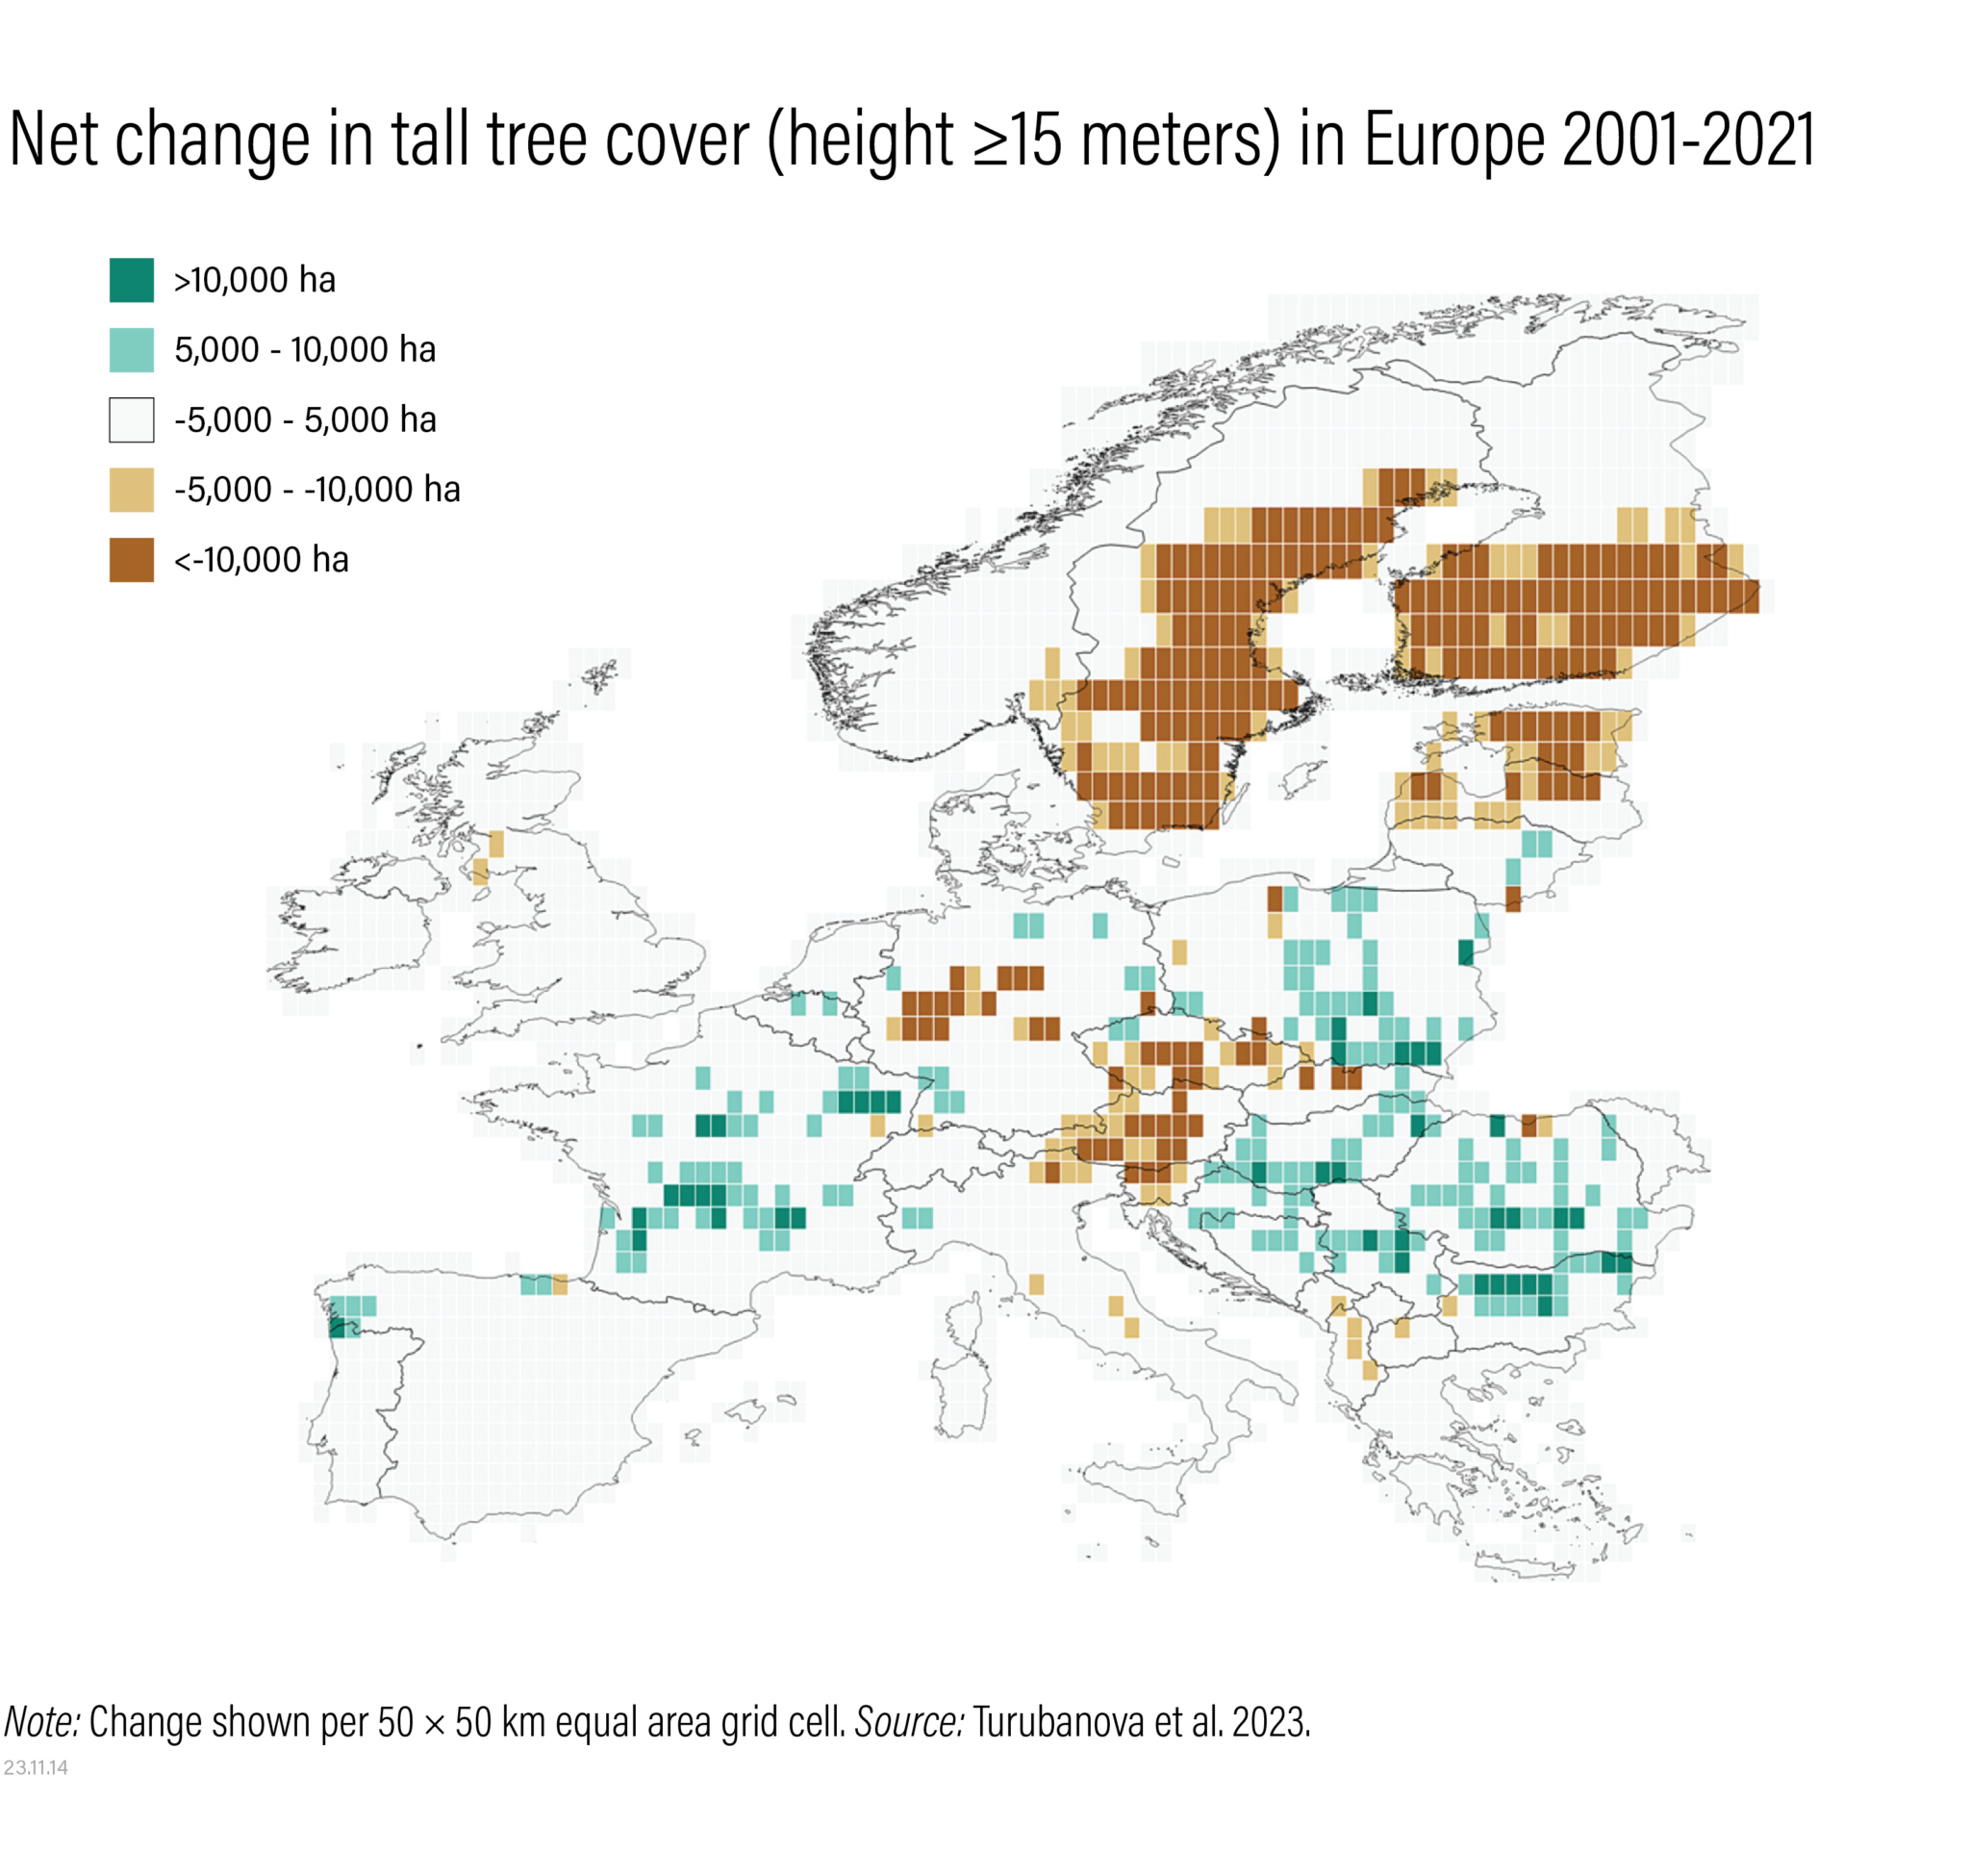 Map showing net change in tall tree cover (height greater than or equal to 15 meters) in Europe 2001-2021